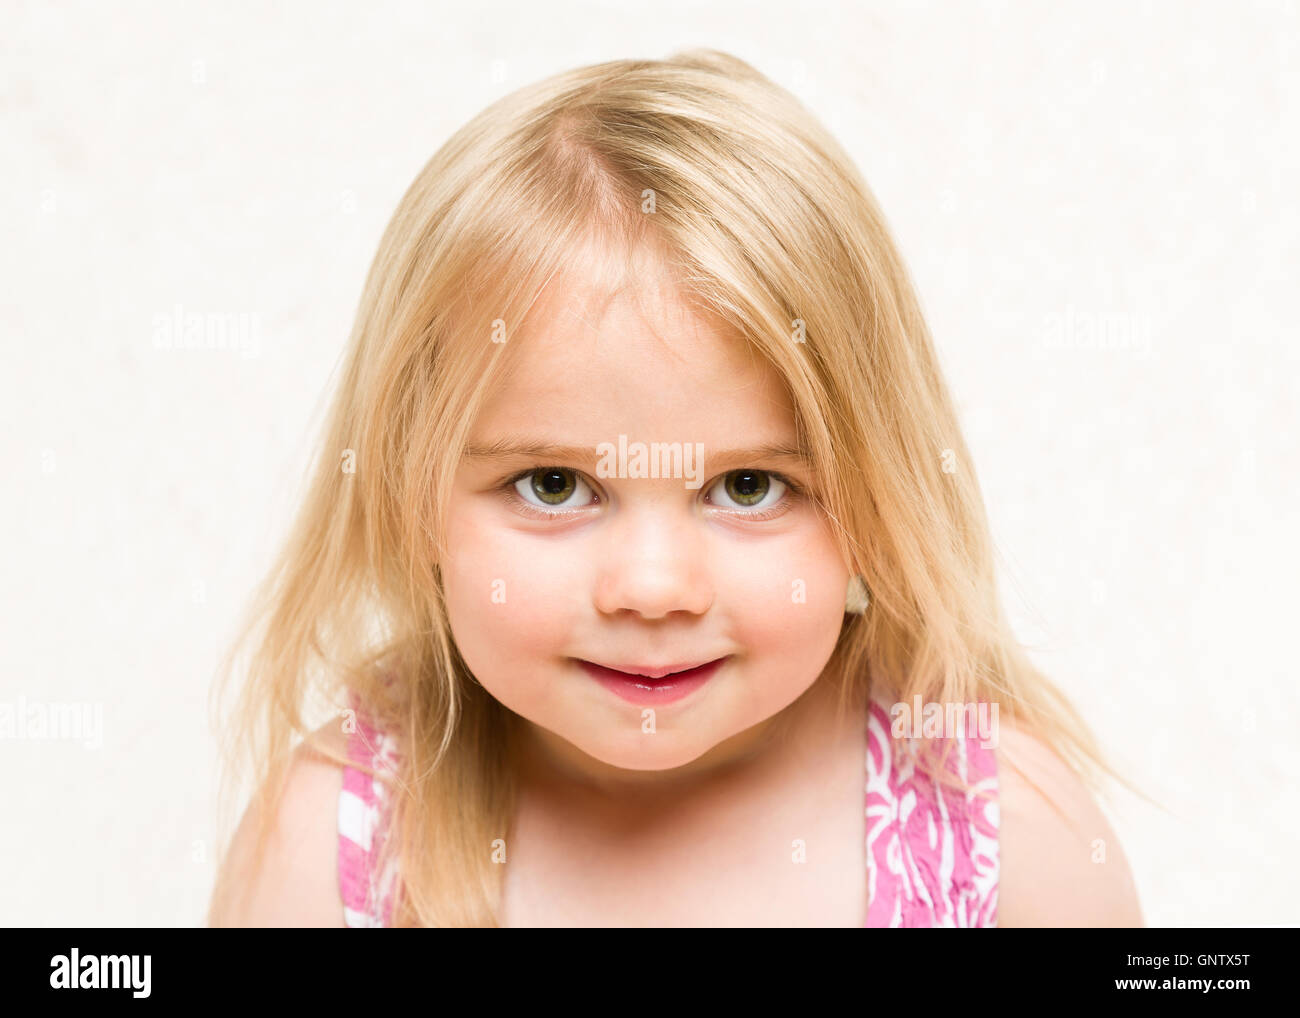 Closeup portrait of beautiful blonde toddler baby girl with cheeky grin Stock Photo